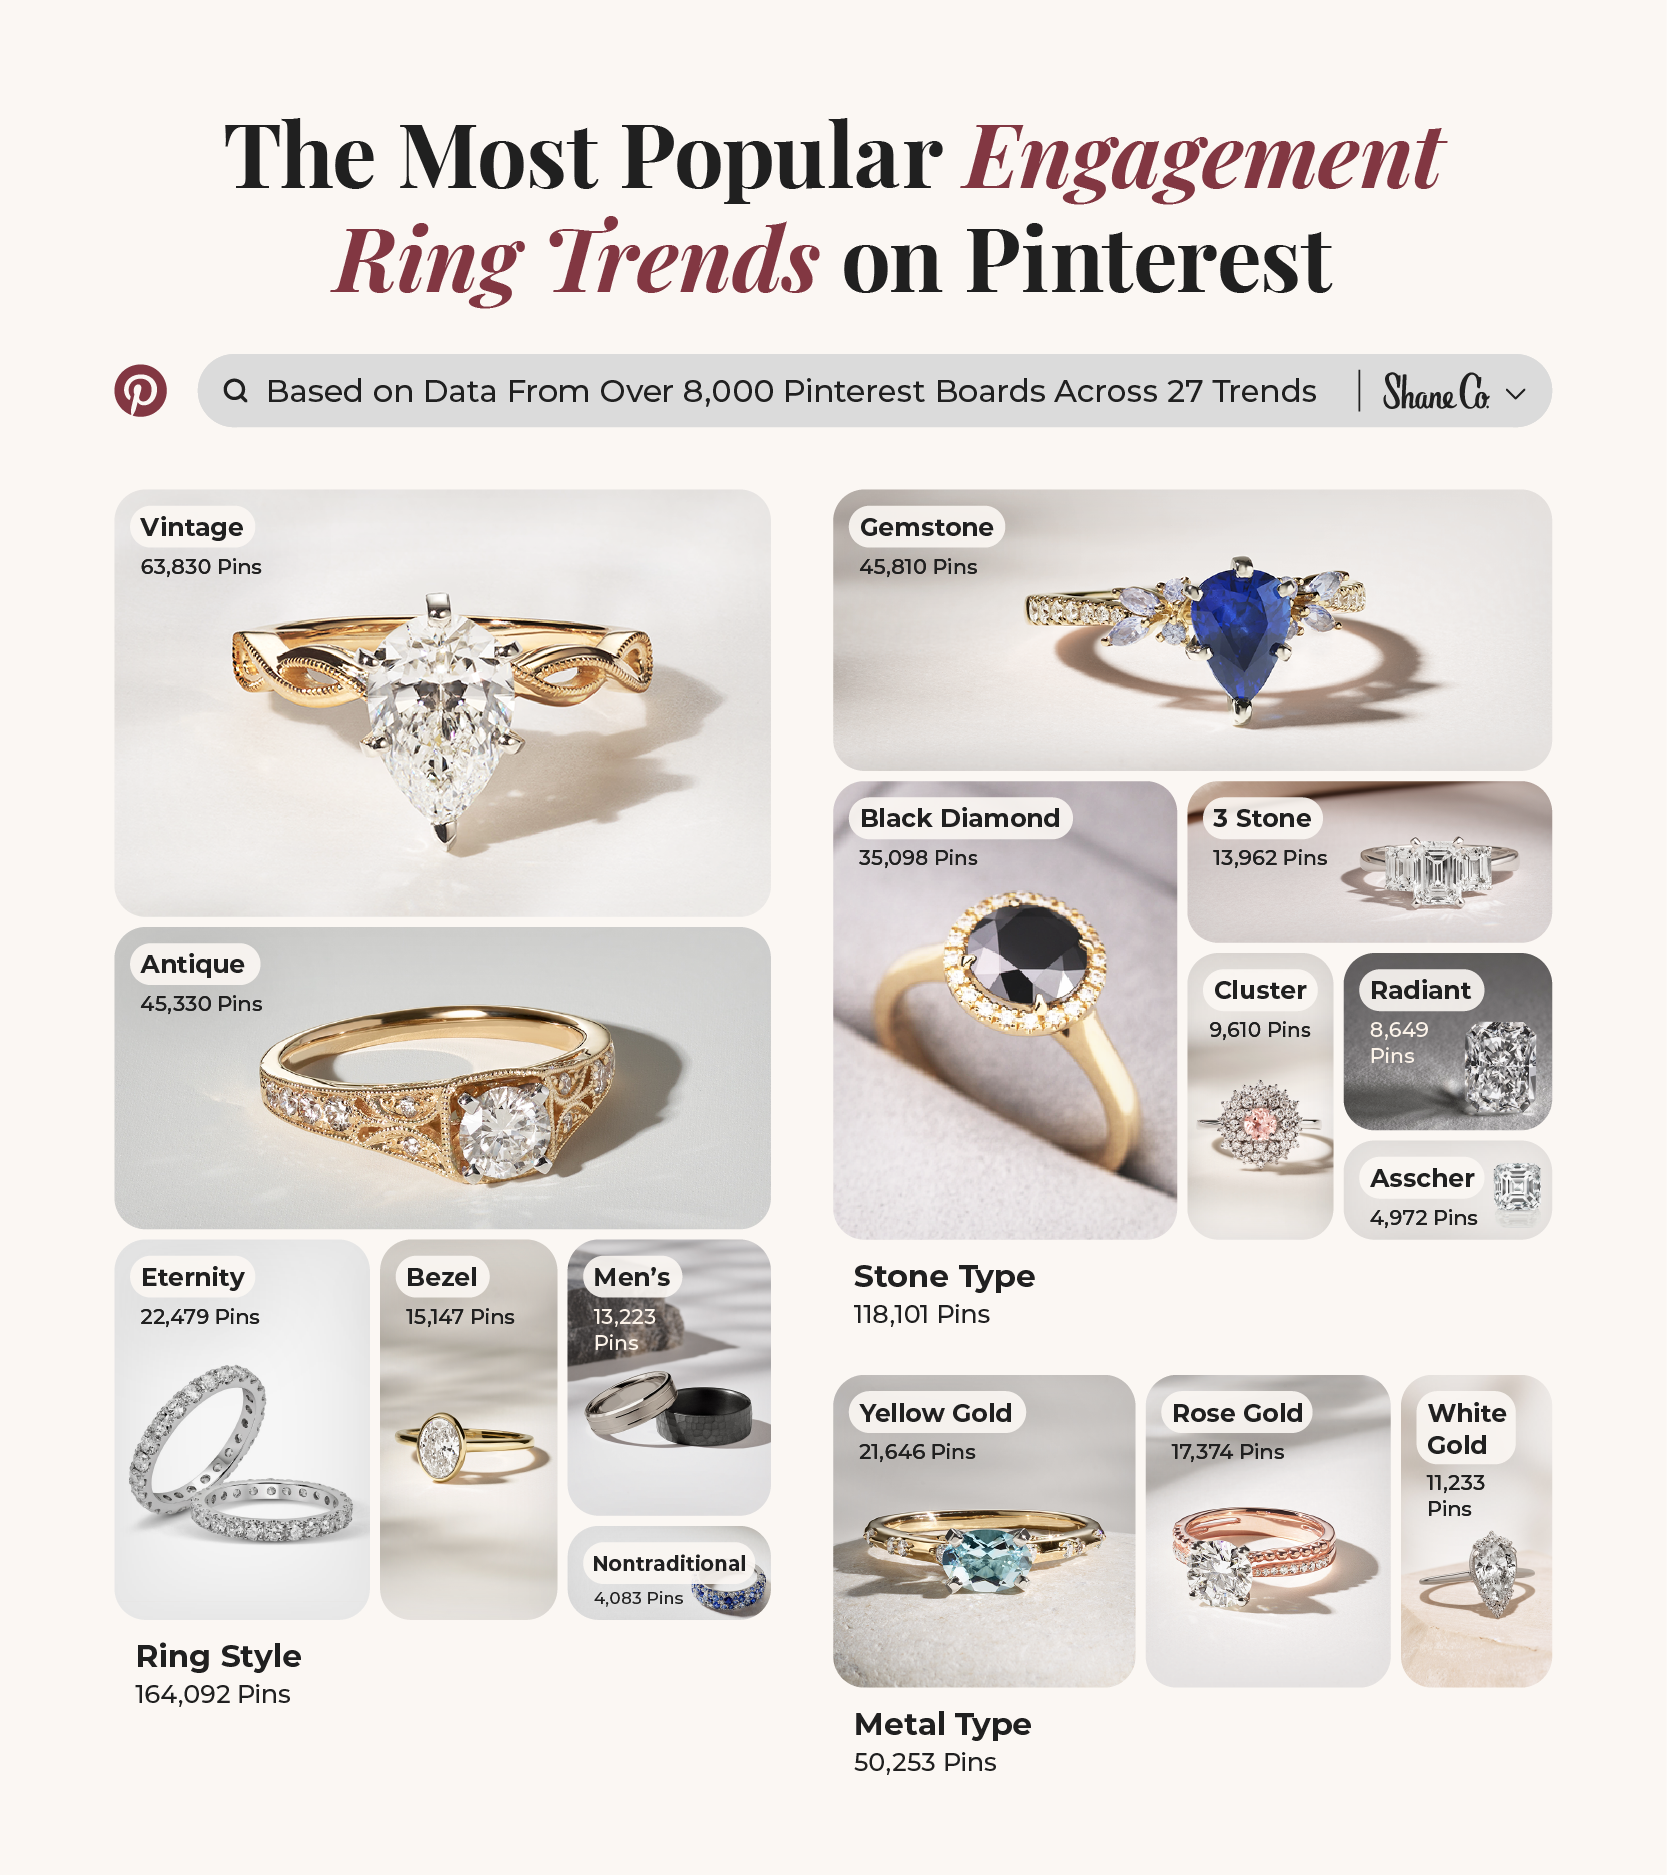 A treemap showing the most popular engagement ring trends on Pinterest